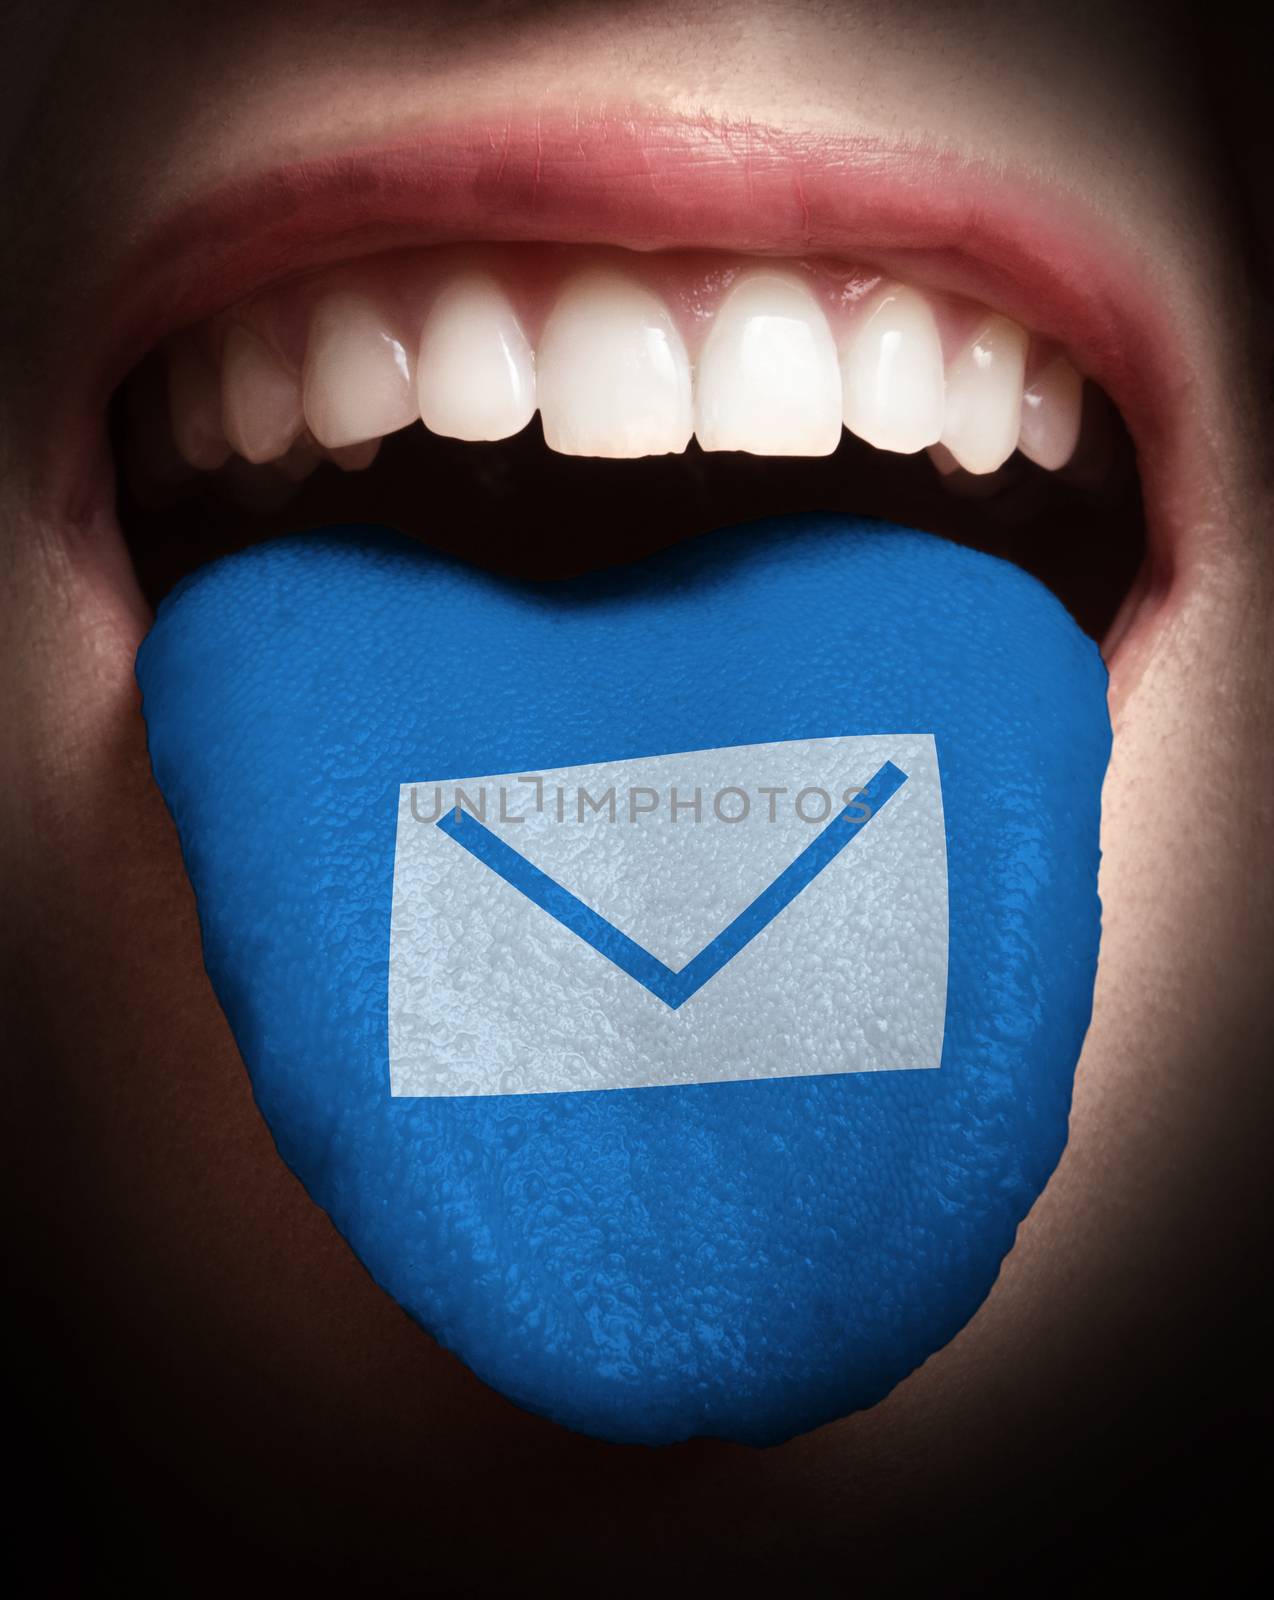 woman with open mouth spreading tongue colored in email icon as concept